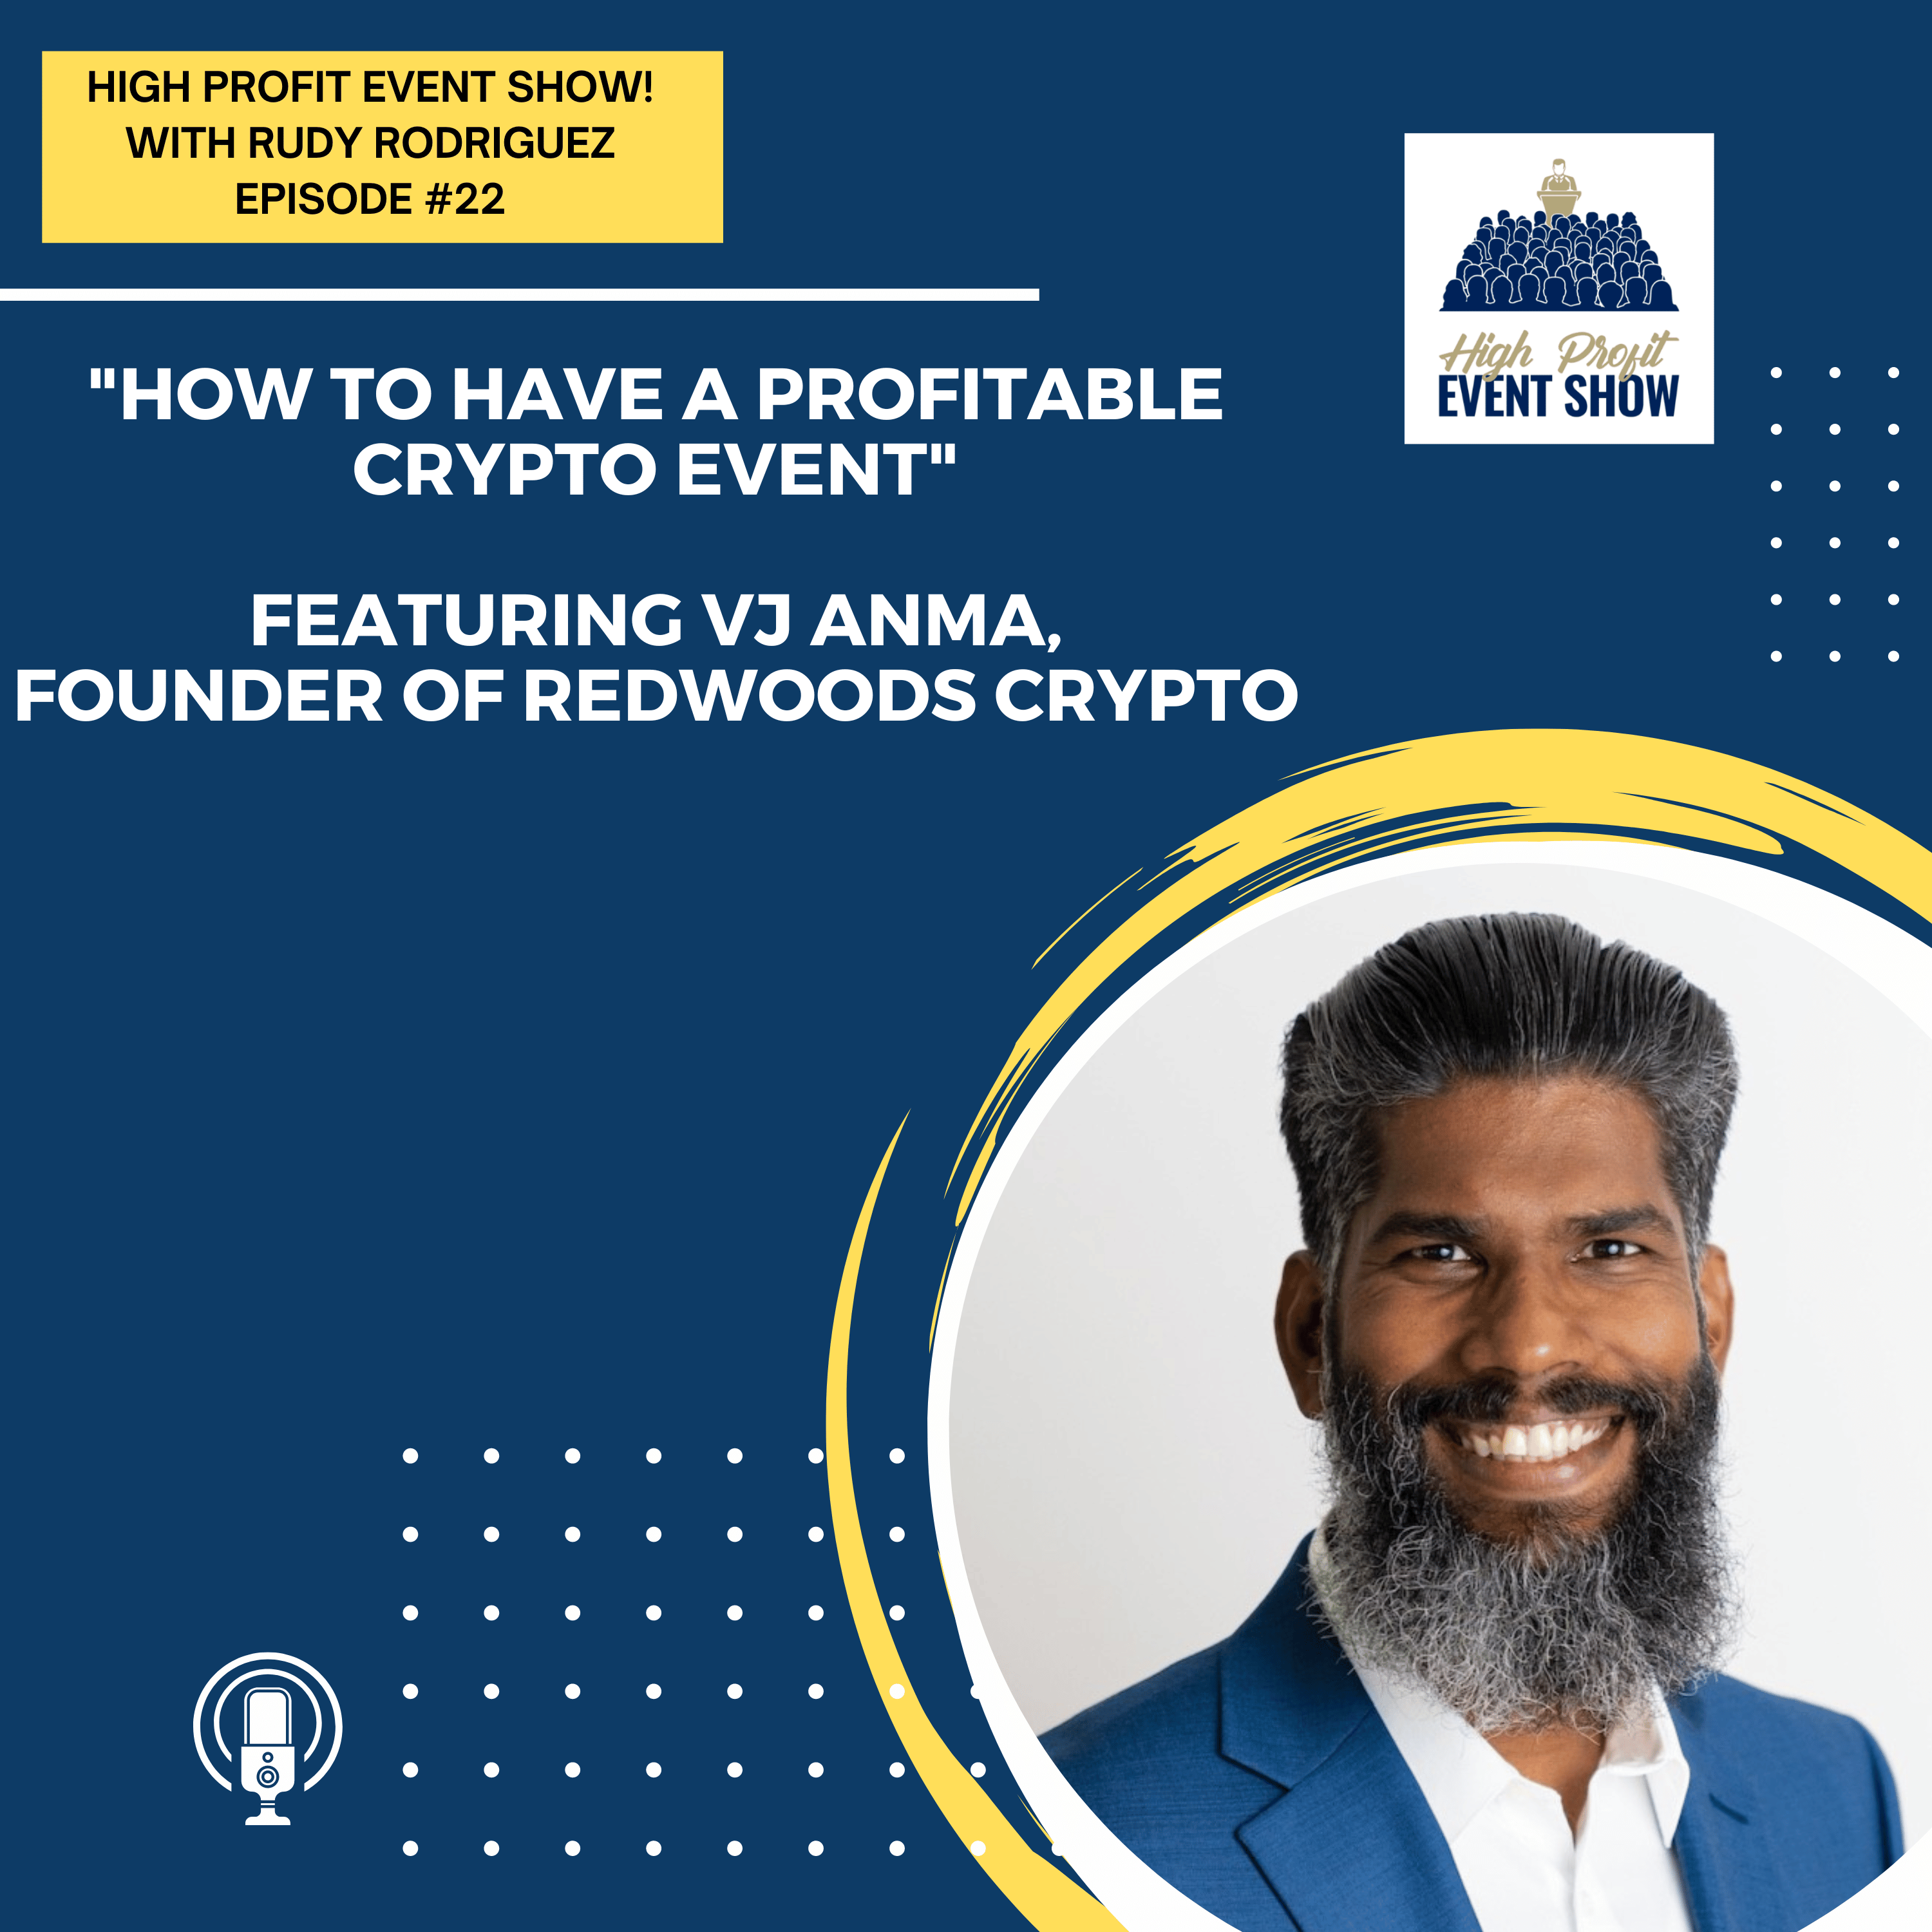 Episode 22: How to Have a Profitable Crypto Event with VJ Anma!